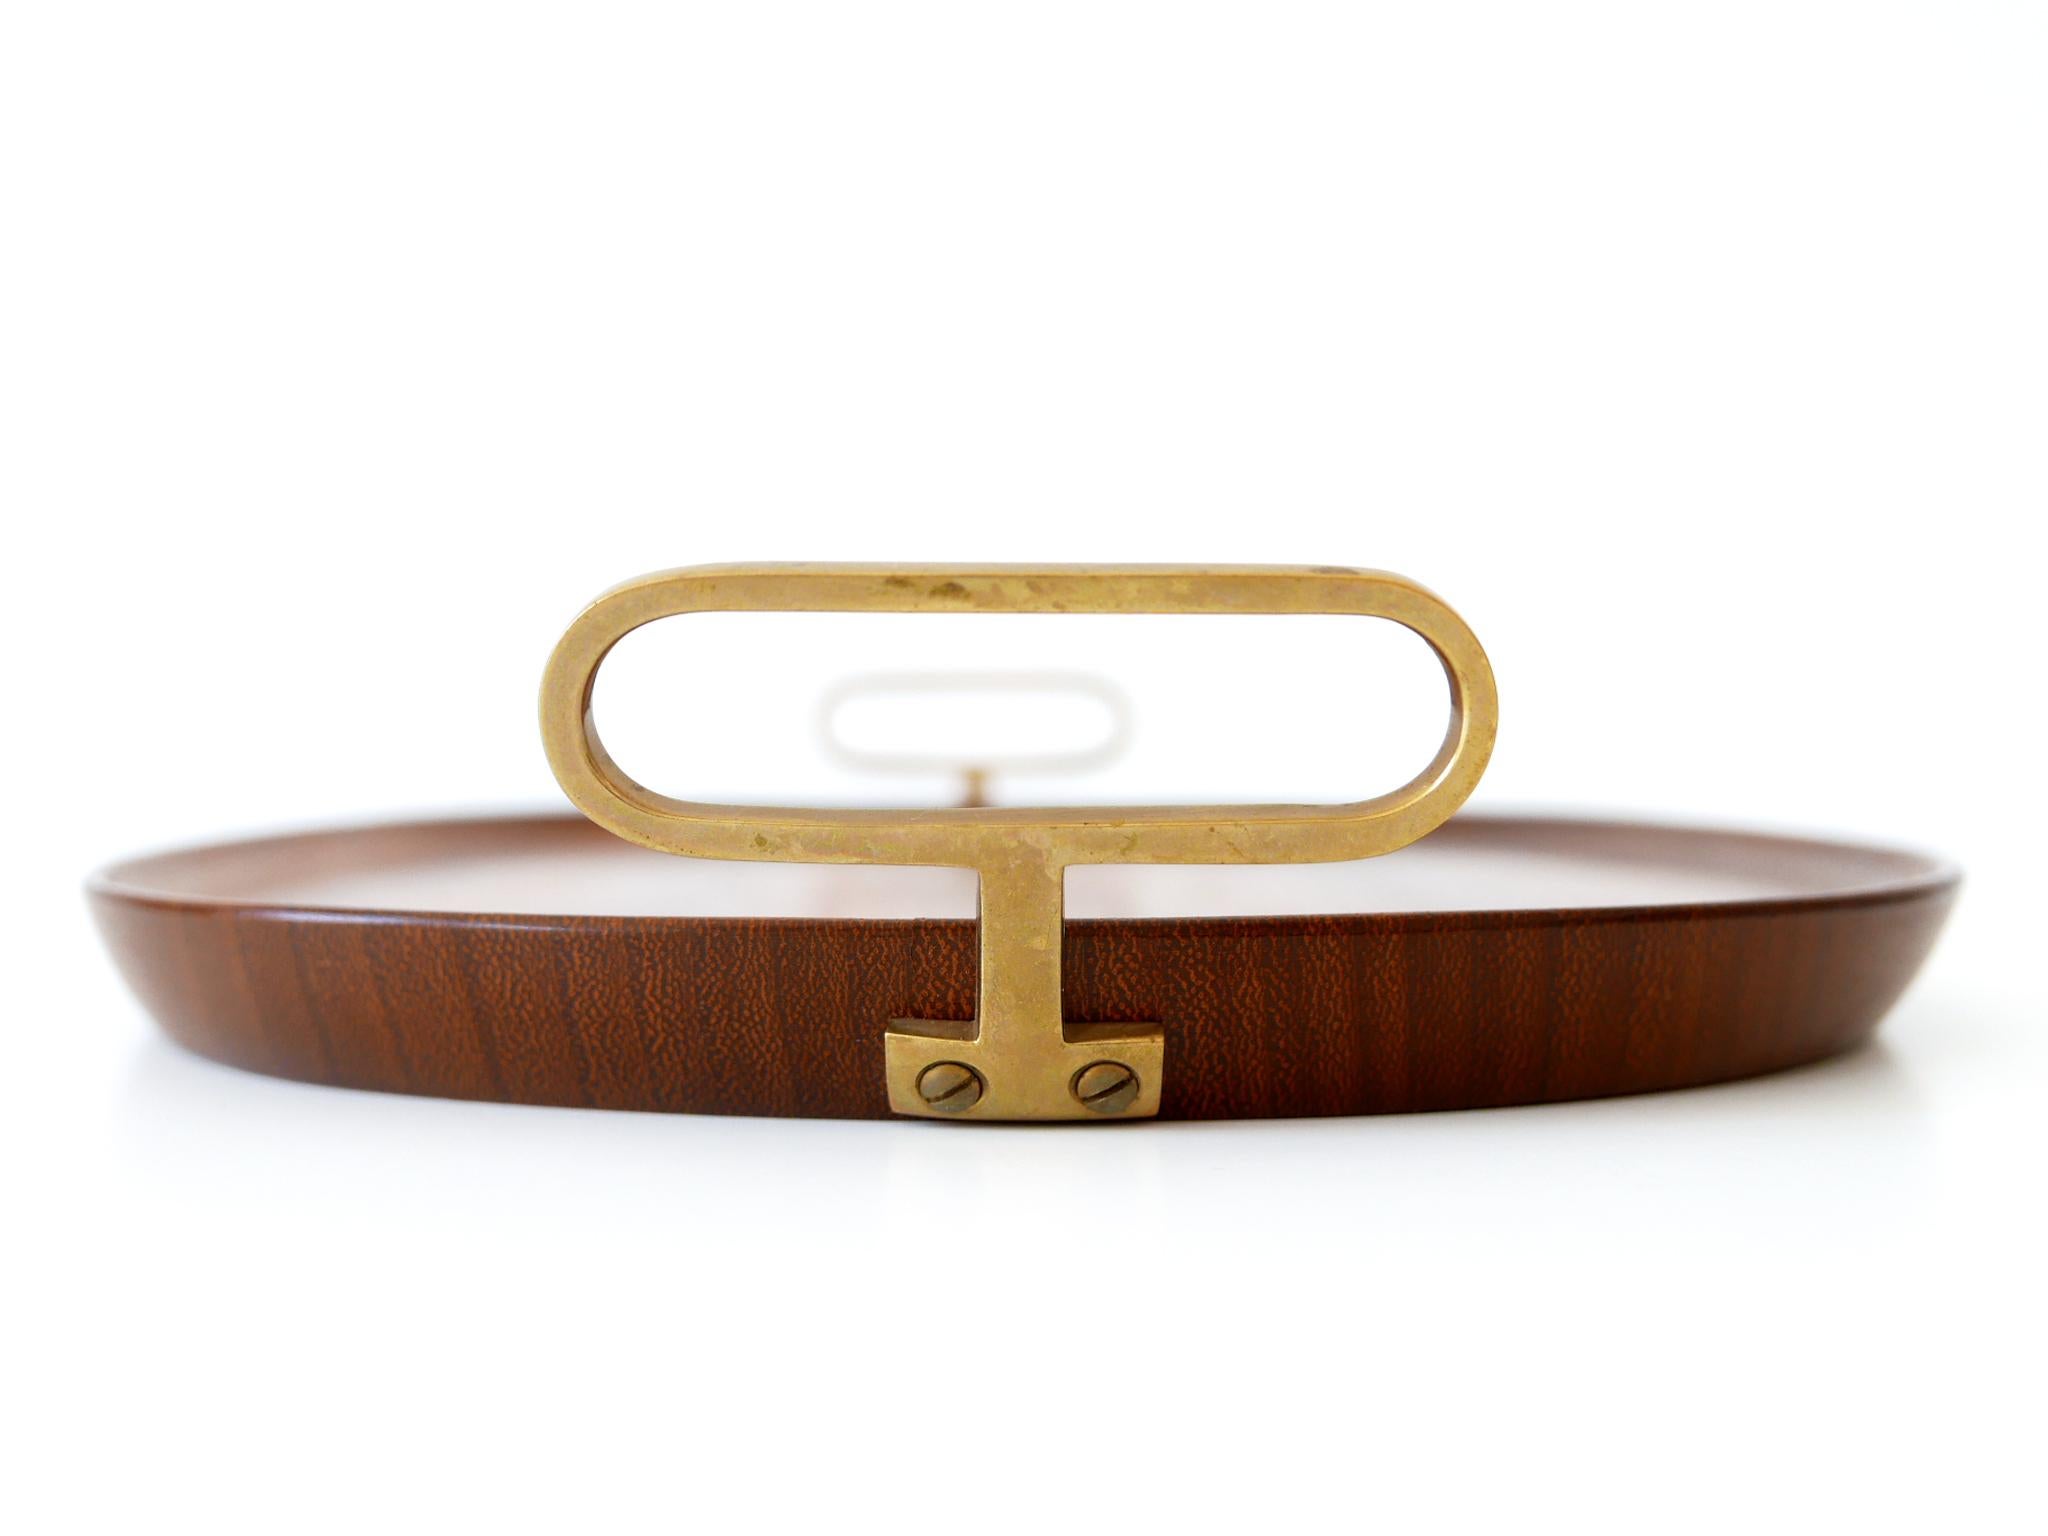 Extremely Rare Mid-Century Modern Teak Serving Tray by Carl Auböck Austria 1950s For Sale 5